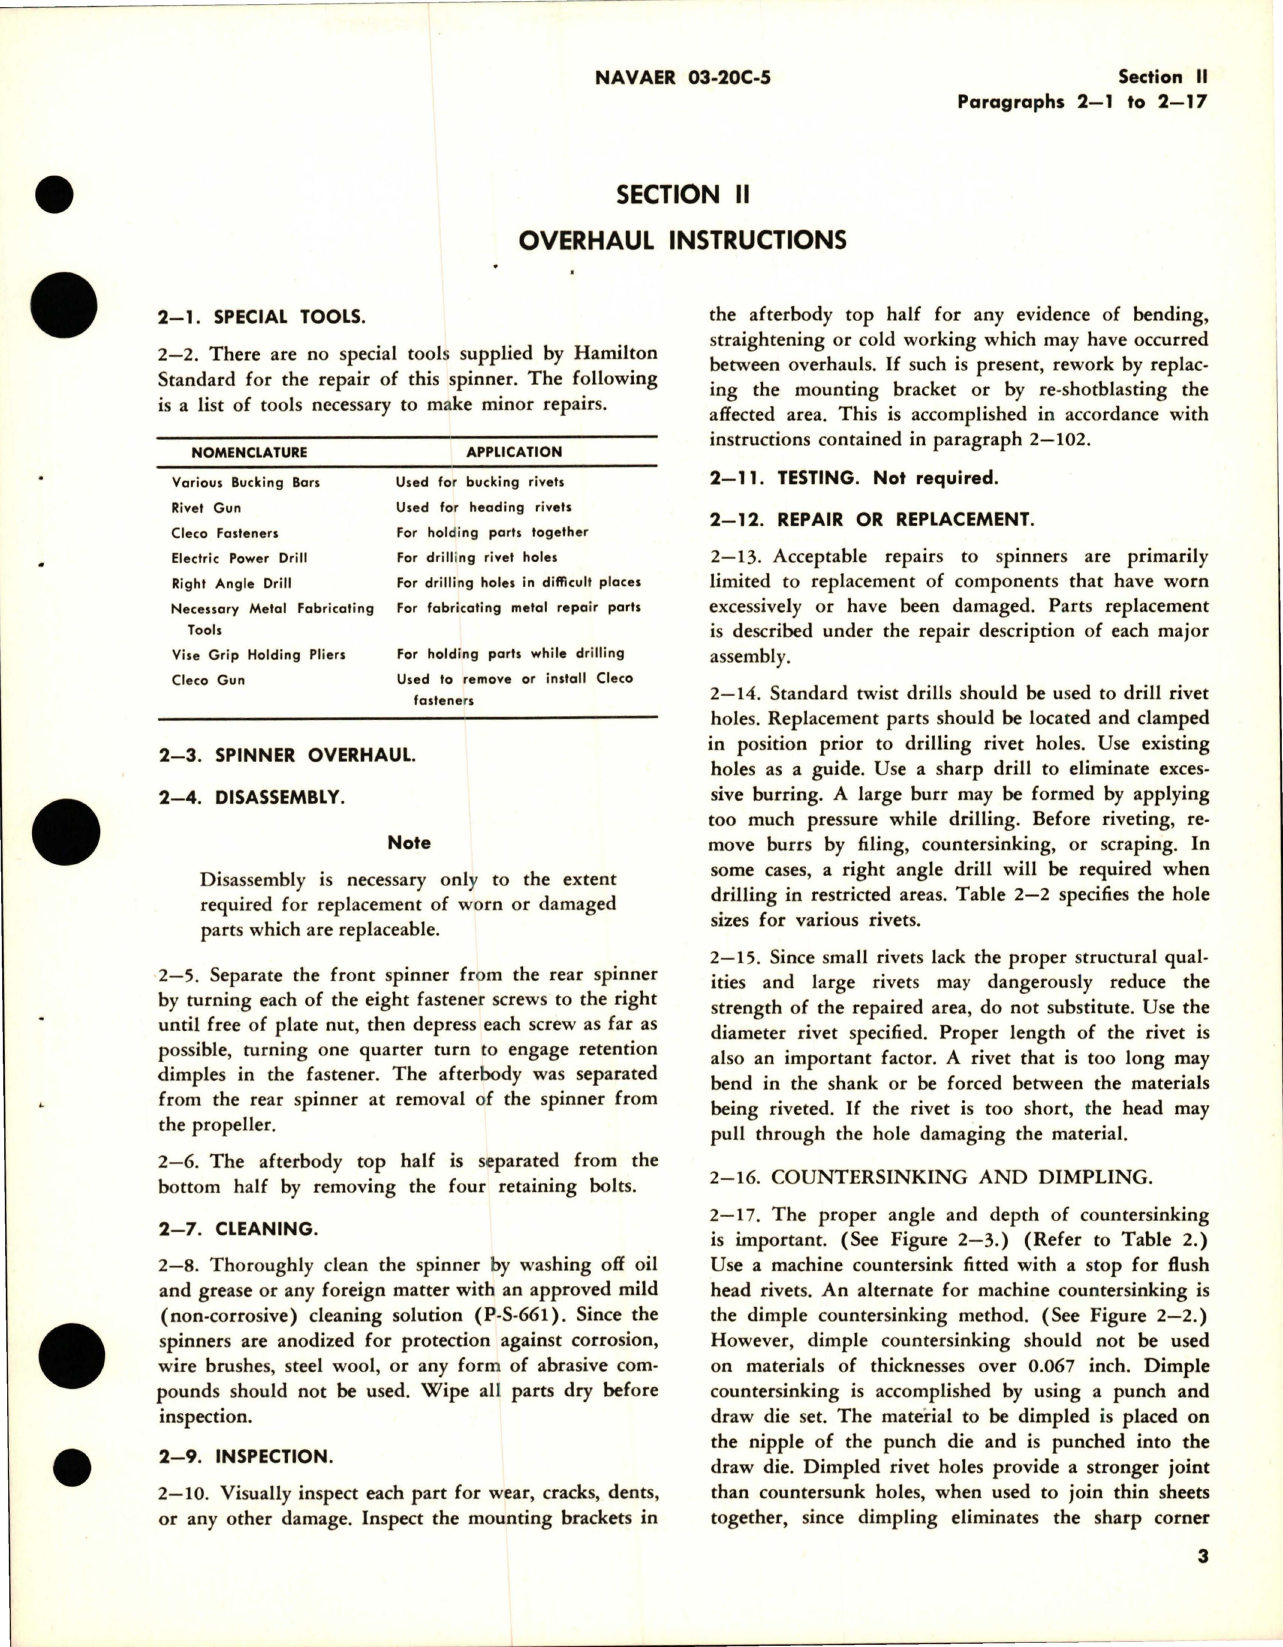 Sample page 7 from AirCorps Library document: Overhaul Instructions for Aircraft Propeller Spinner and Anti-Icing - Assembly No. 535247 